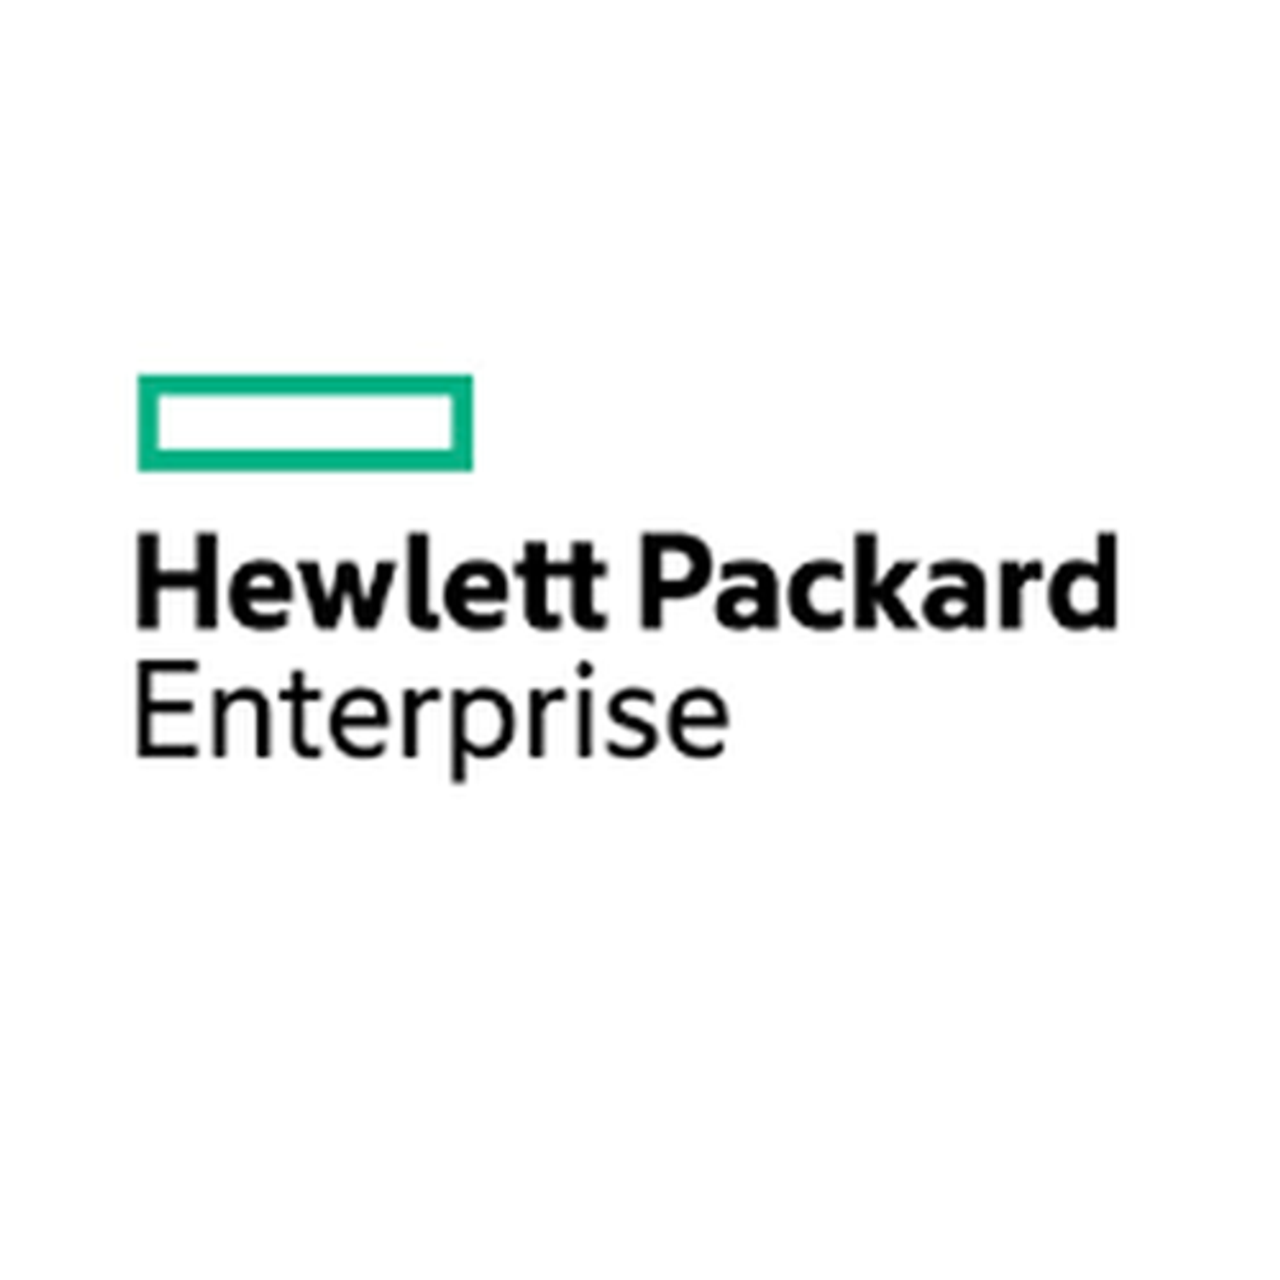 HPE SY480 Gen10 XeonS 4216 Reman FIO Kit (HSSL Sourcing) - HPE Discontinued Product)